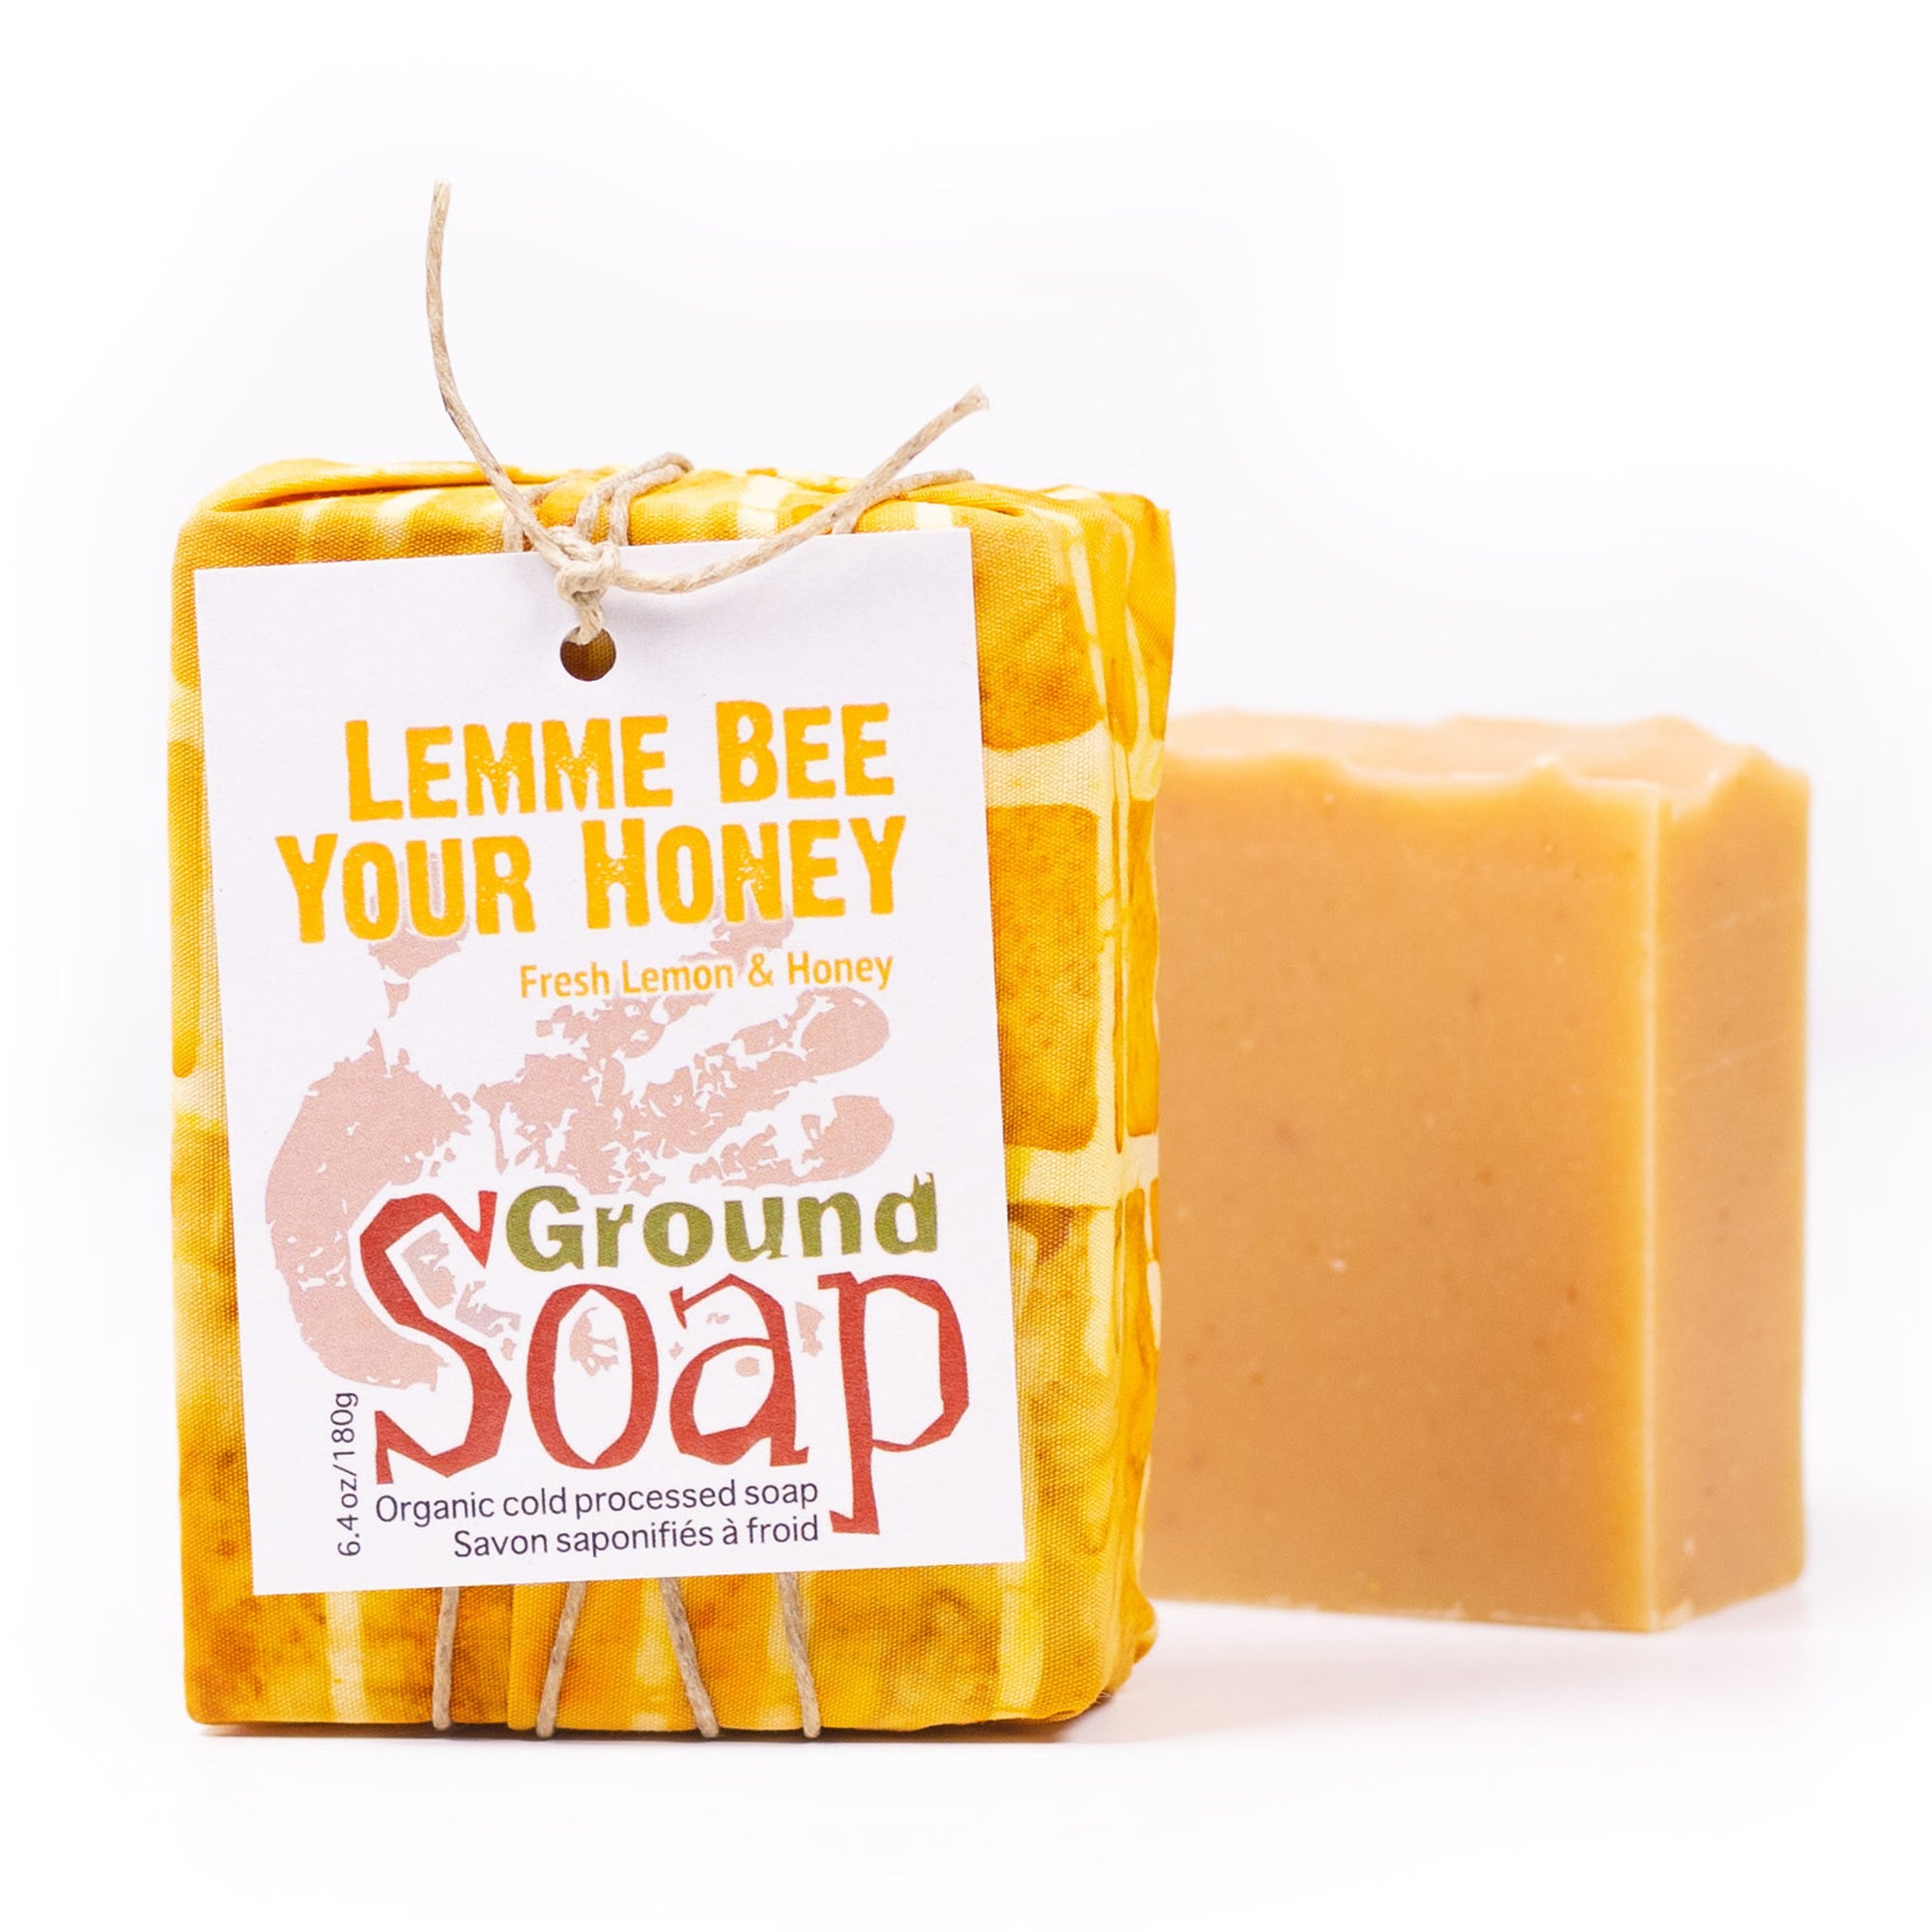 Lemme Bee Your Honey lemon essential oil and honey organic bar soap from ground Soap.